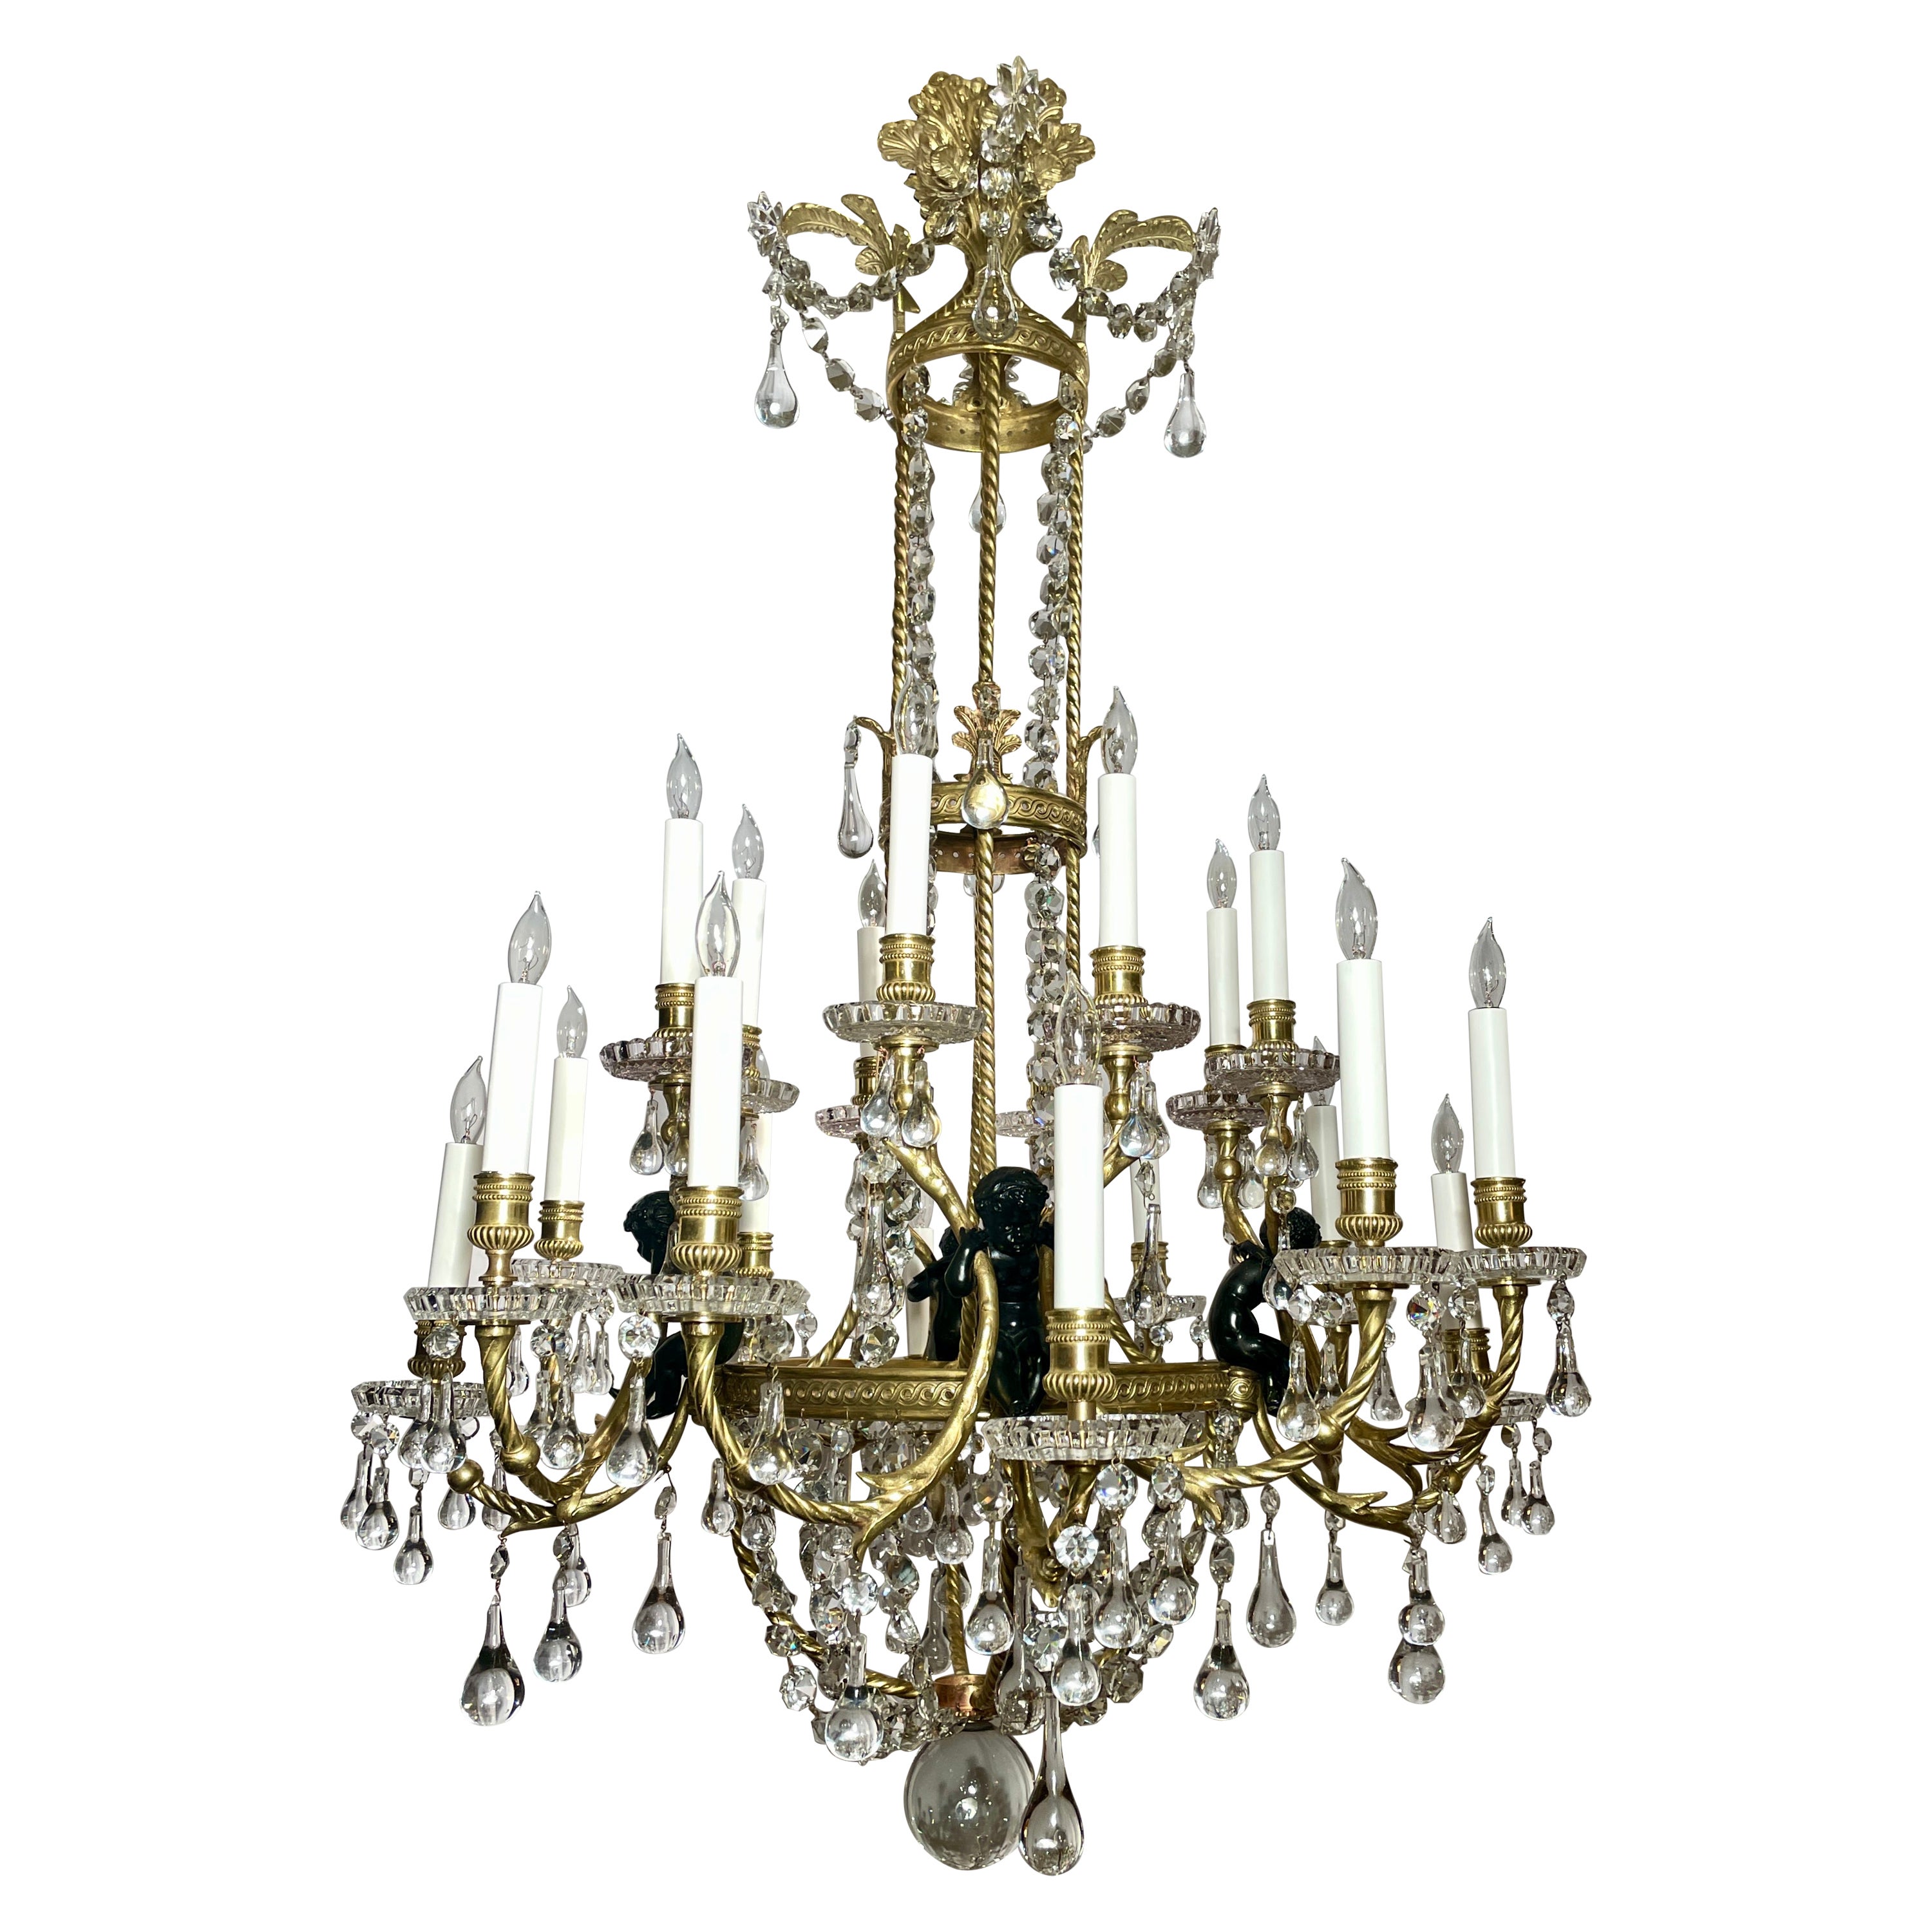 Antique French Baccarat Crystal & Bronze D'ore Chandelier, circa 1890 For Sale